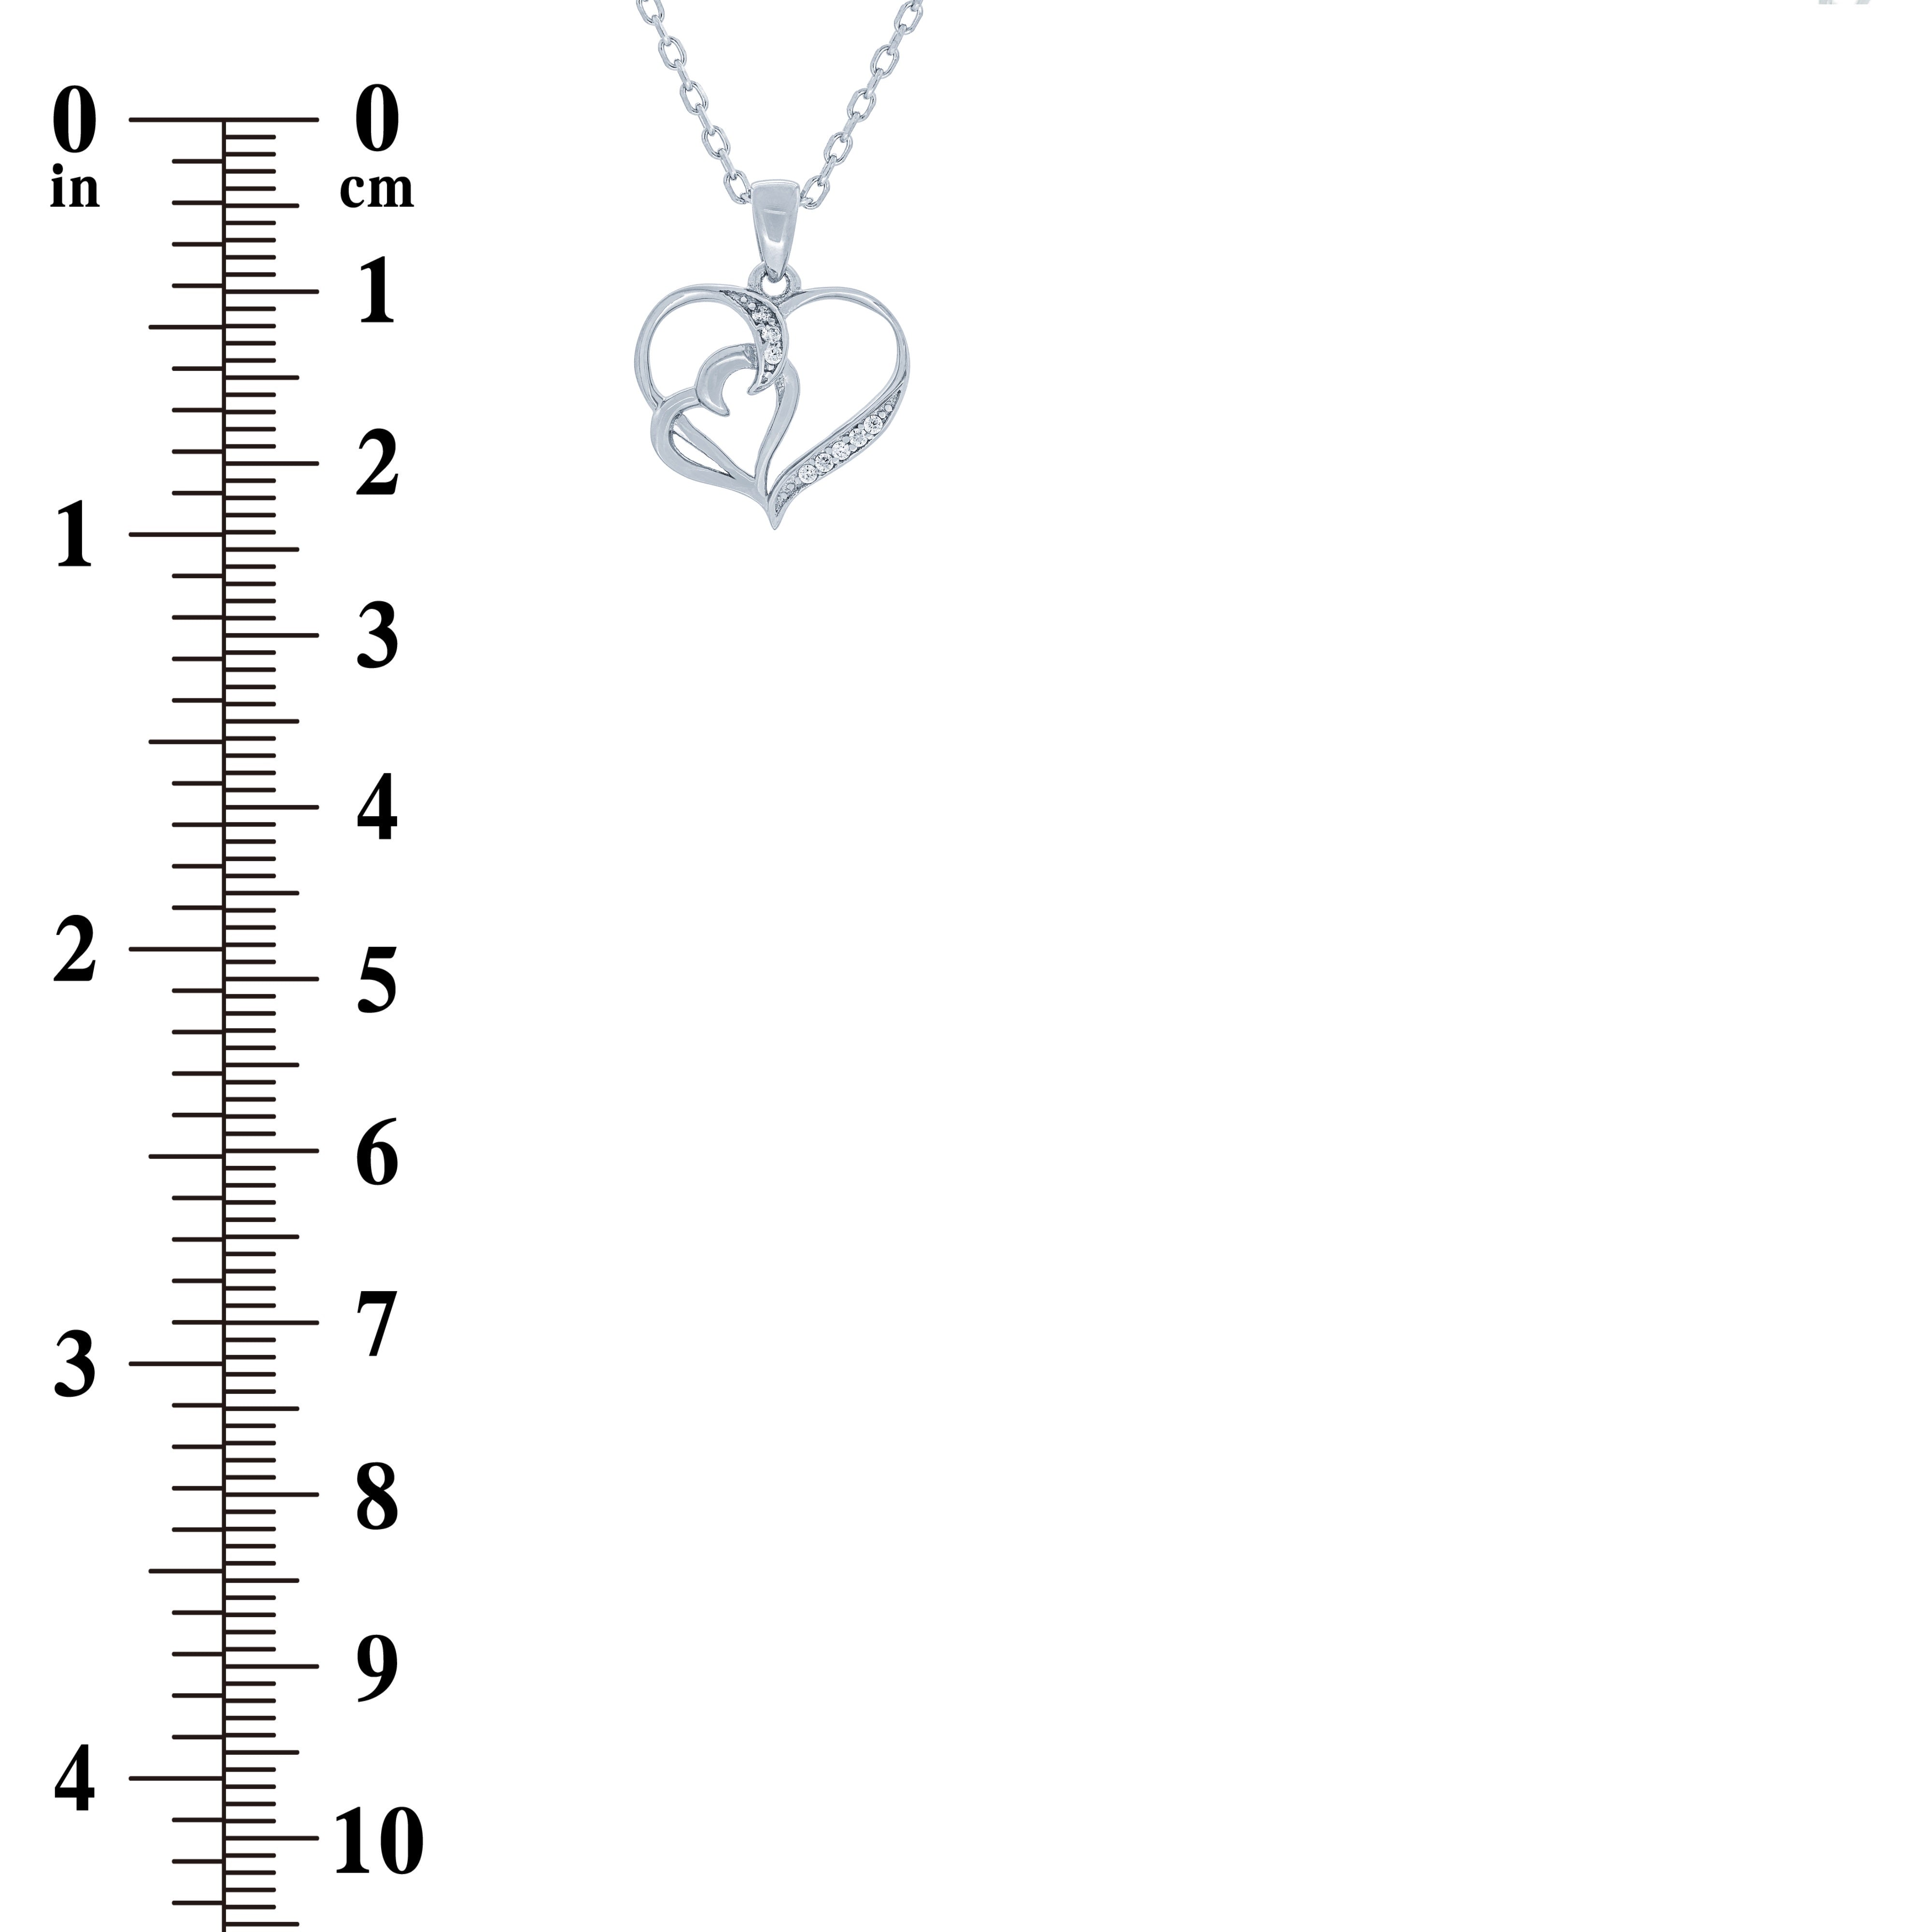 (100151) White Cubic Zirconia Heart Pendant Necklace In Sterling Silver